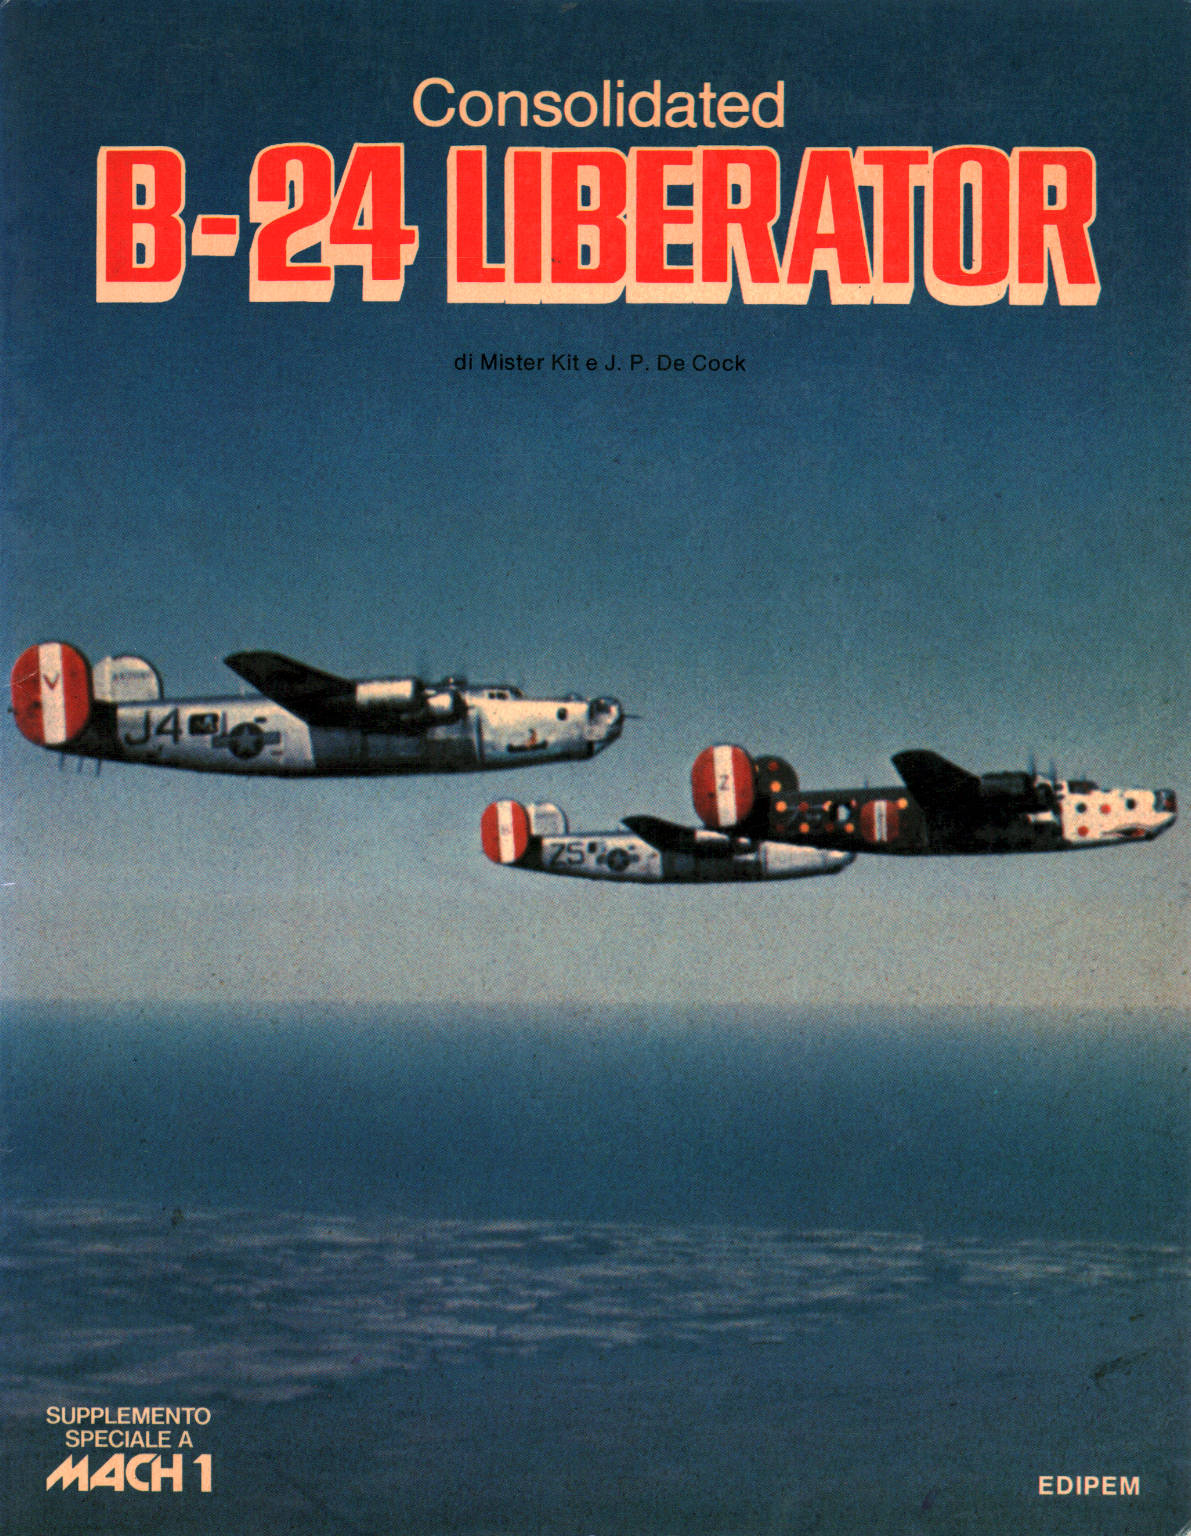 Consolidated B - 24 Liberator, Señor Kit, G. Aders